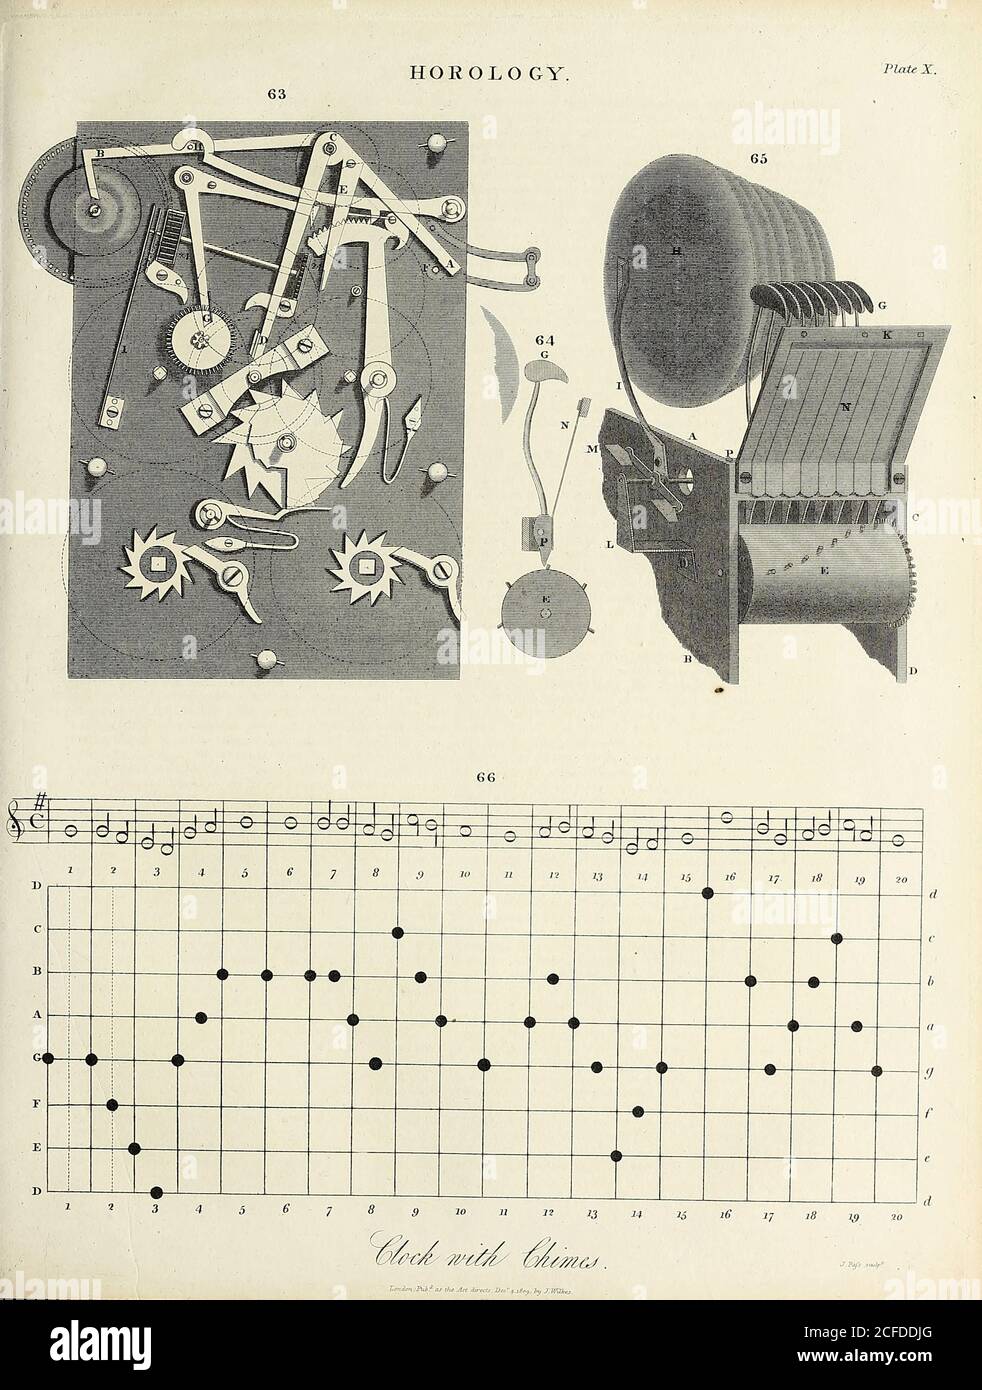 Clock with Chimes Horology [study of the measurement of time. Clocks, watches, clockwork, sundials, hourglasses, clepsydras, timers, time recorders, marine chronometers]. Copperplate engraving By J. Pafs From the Encyclopaedia Londinensis or, Universal dictionary of arts, sciences, and literature; Volume X;  Edited by Wilkes, John. Published in London in 1811 Stock Photo